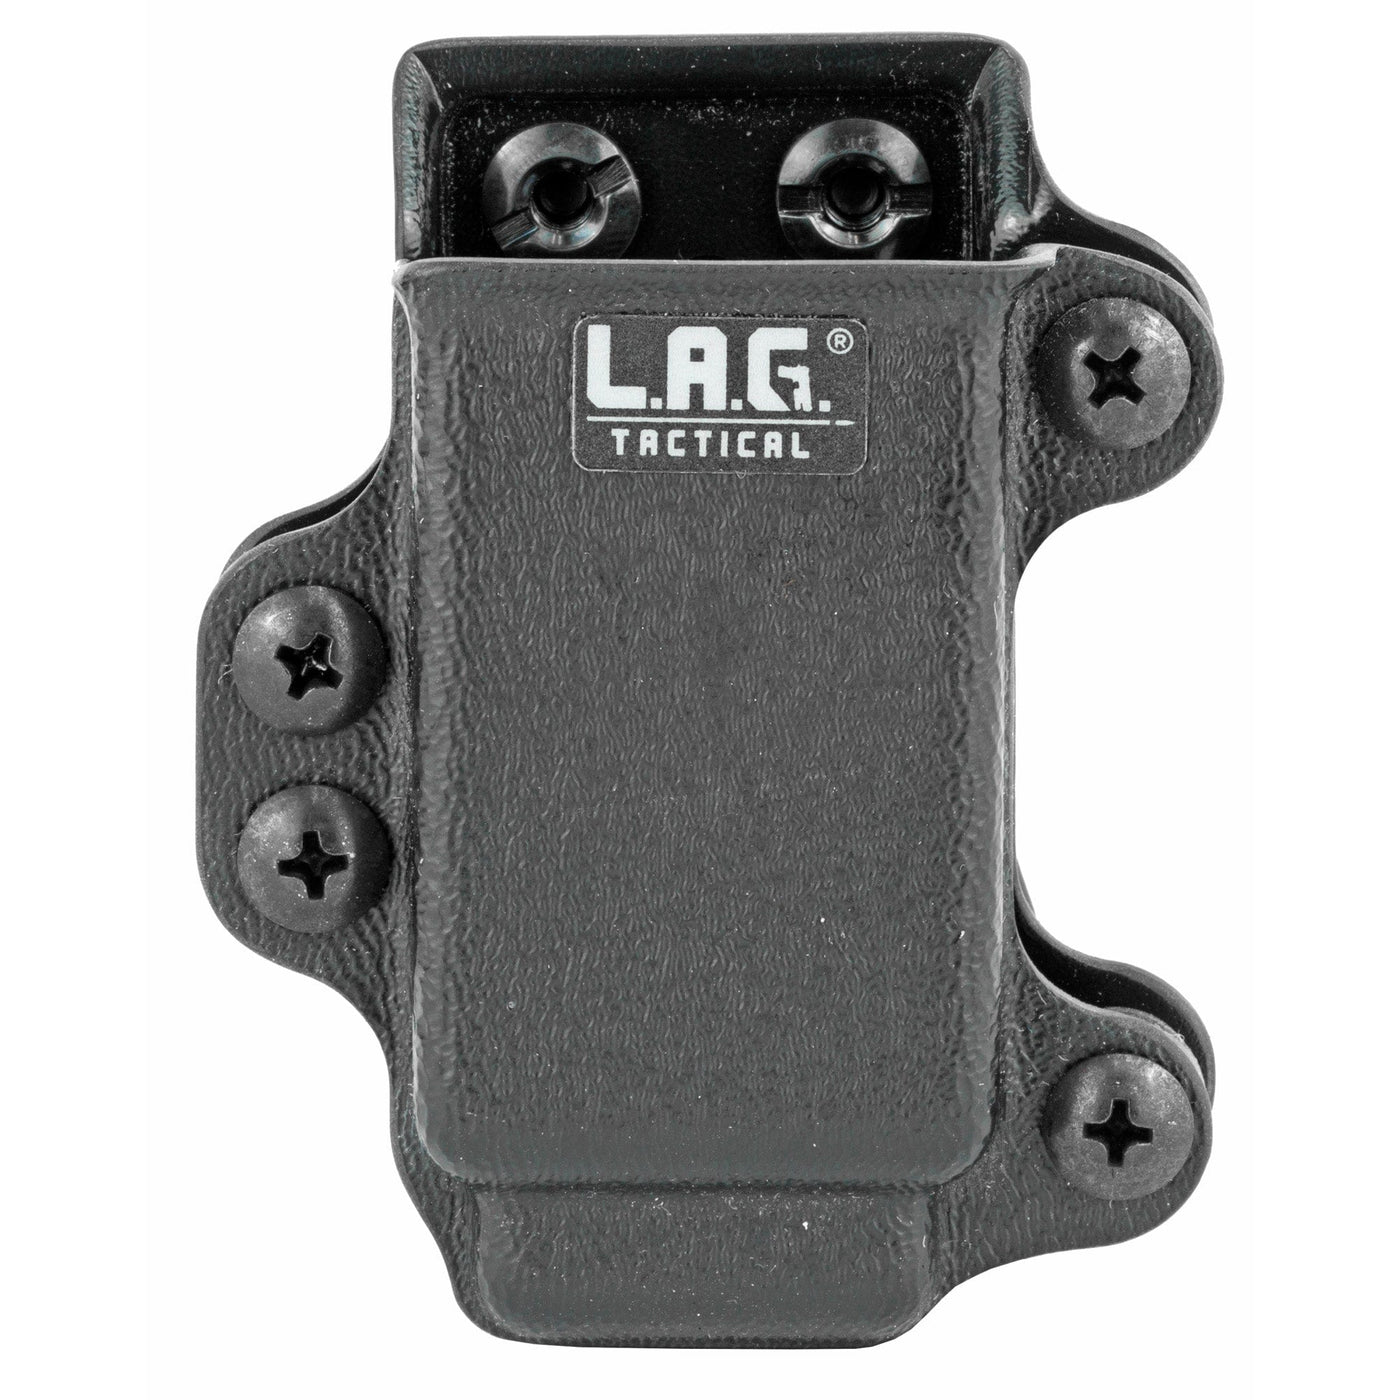 L.A.G. Tactical, Inc. Lag Spmc Mag Carrier 9/40 Full Blk Holsters